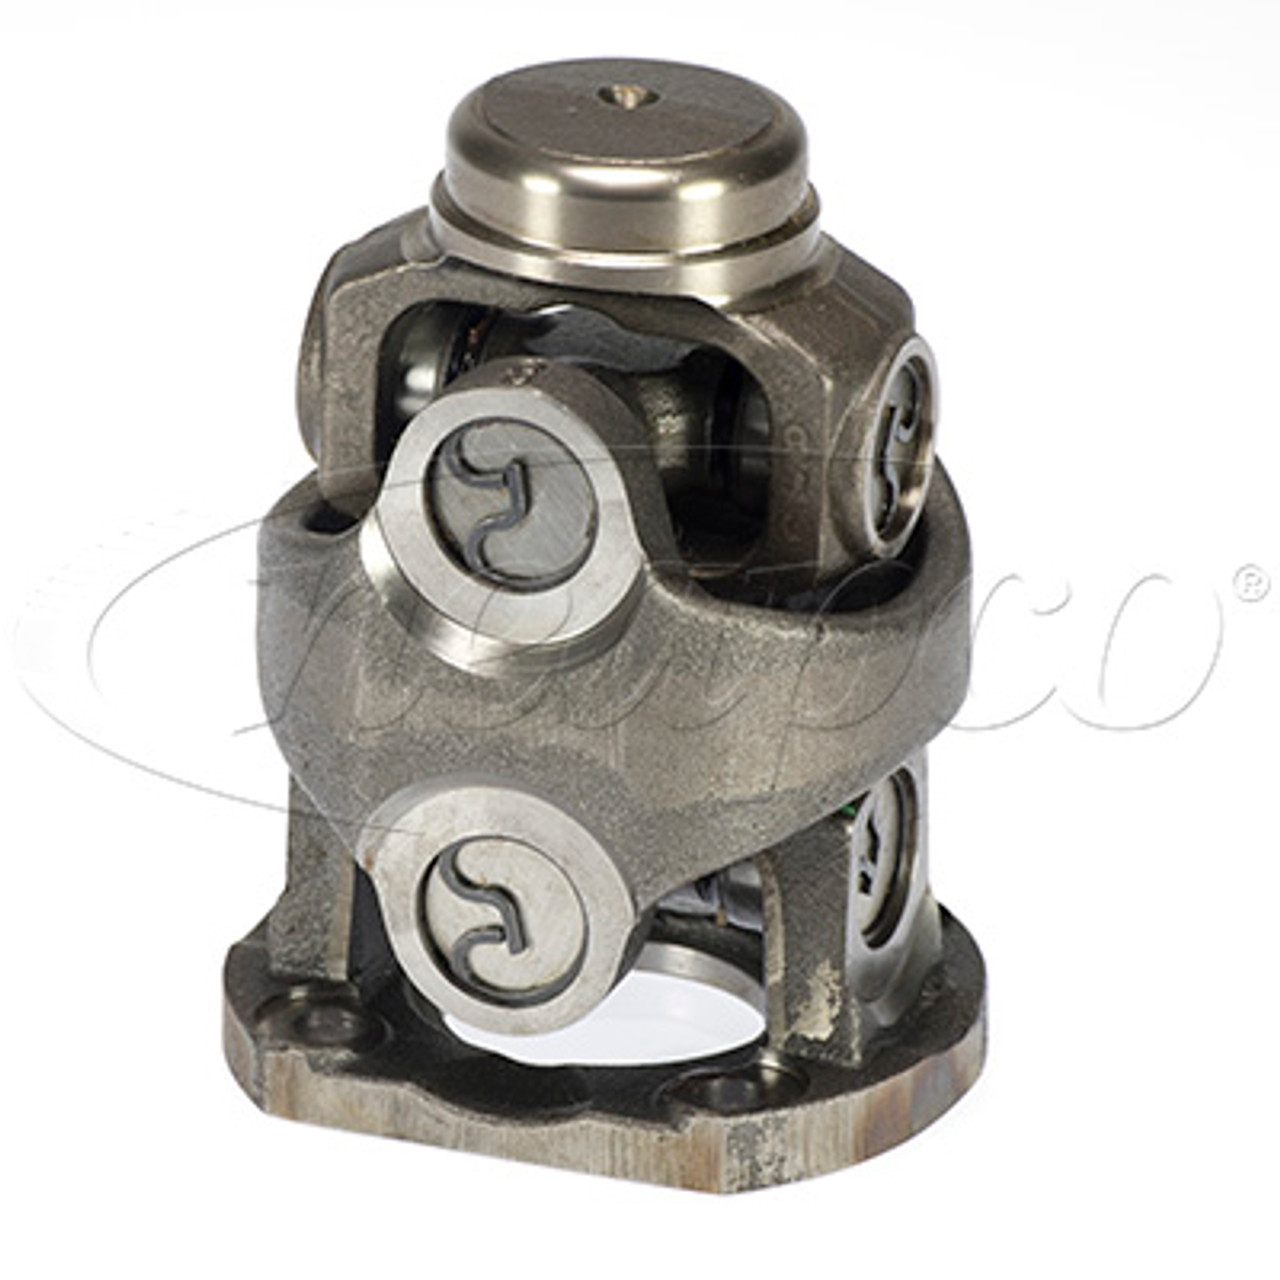 3.940" Flange - 2.500" x .095" Round - Spicer® 1350 Double Cardan CV Head Assembly  N921056G